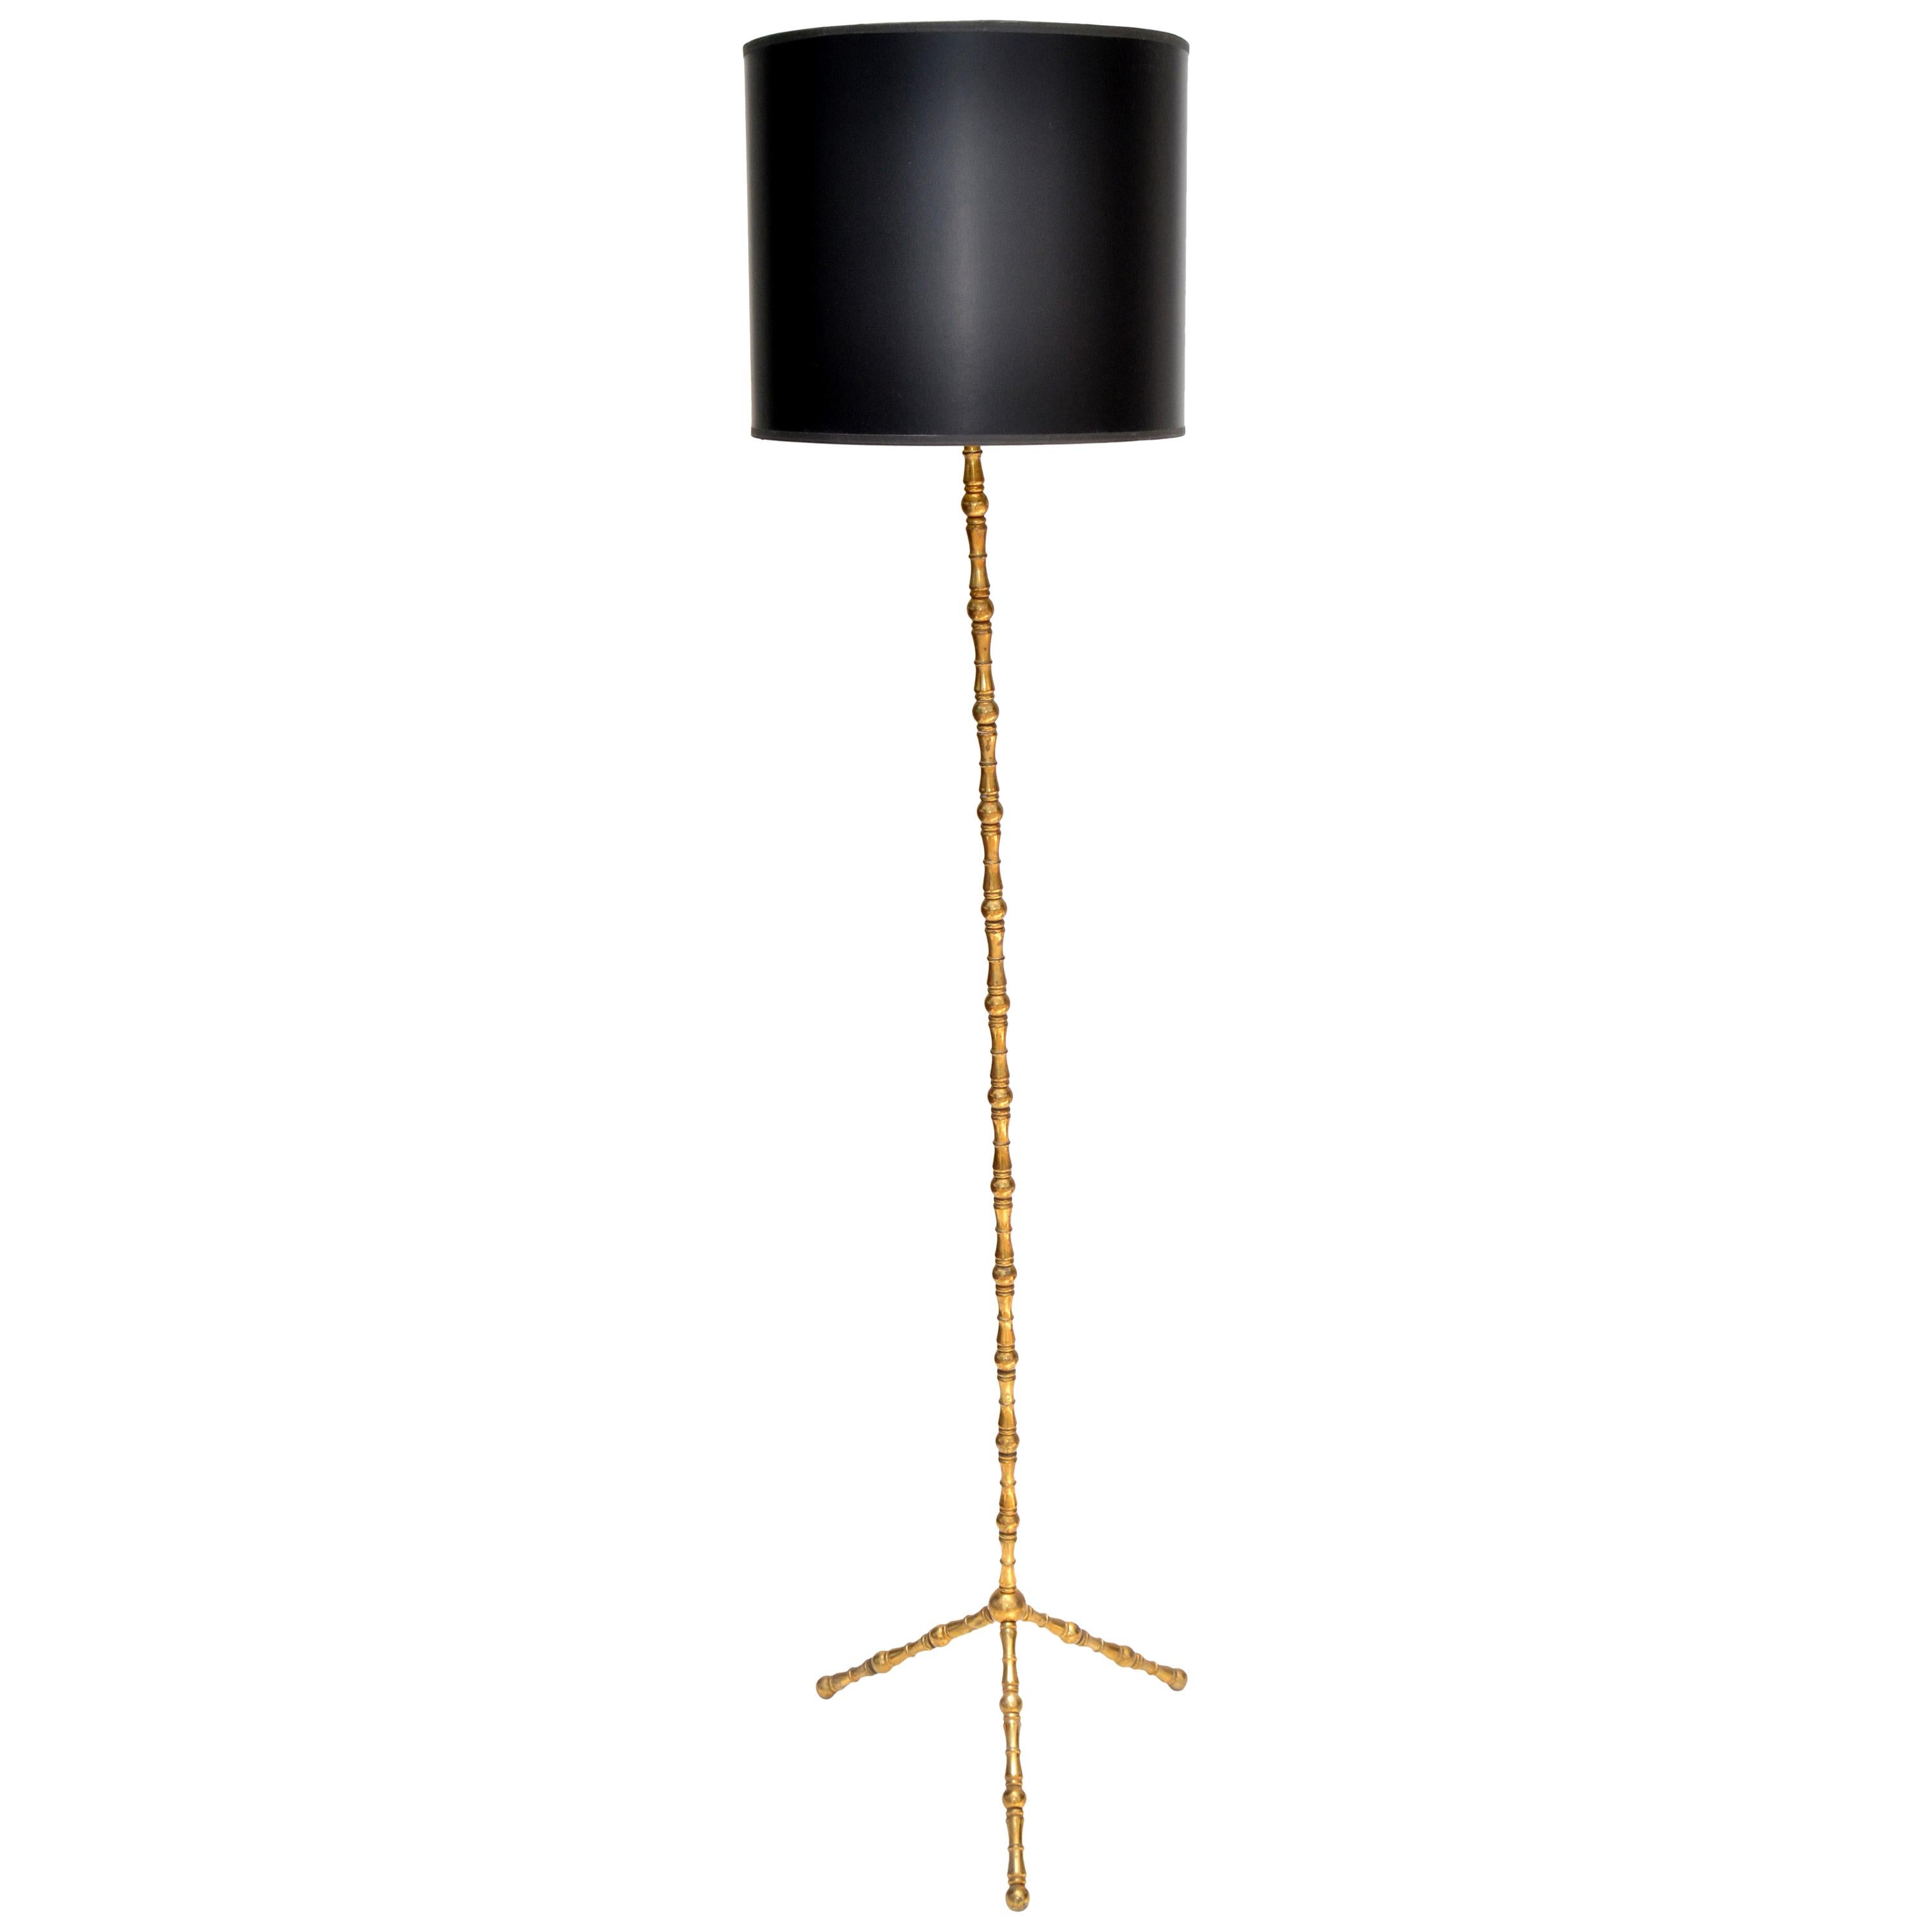 French Neoclassical Bronze and Brass Maison Baguès Floor Lamp, 1950 For Sale